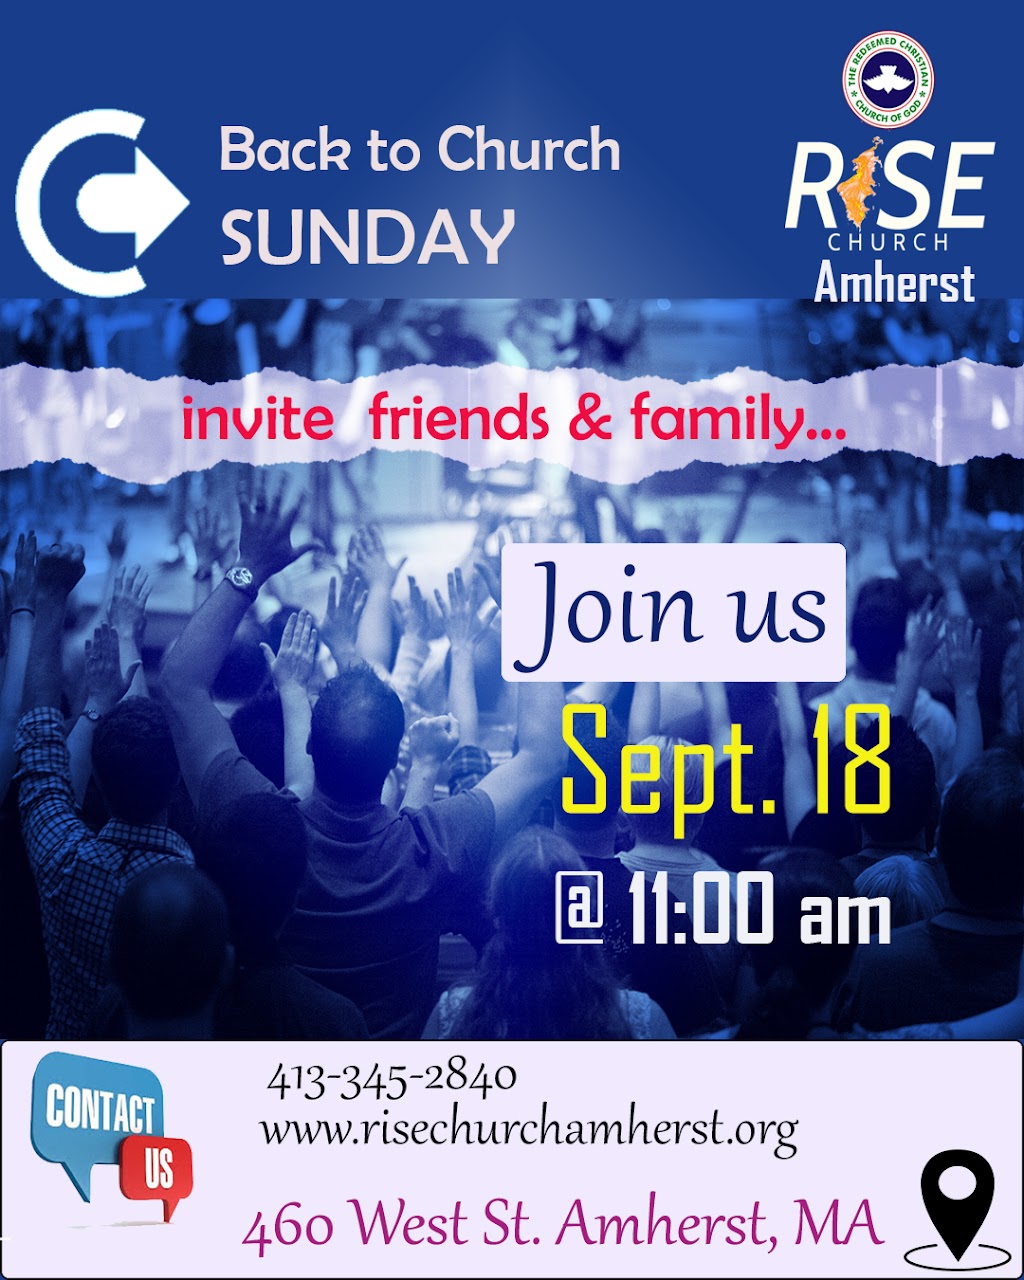 RCCG Rise Church Amherst | 460 West St, Amherst, MA 01002 | Phone: (413) 345-2840